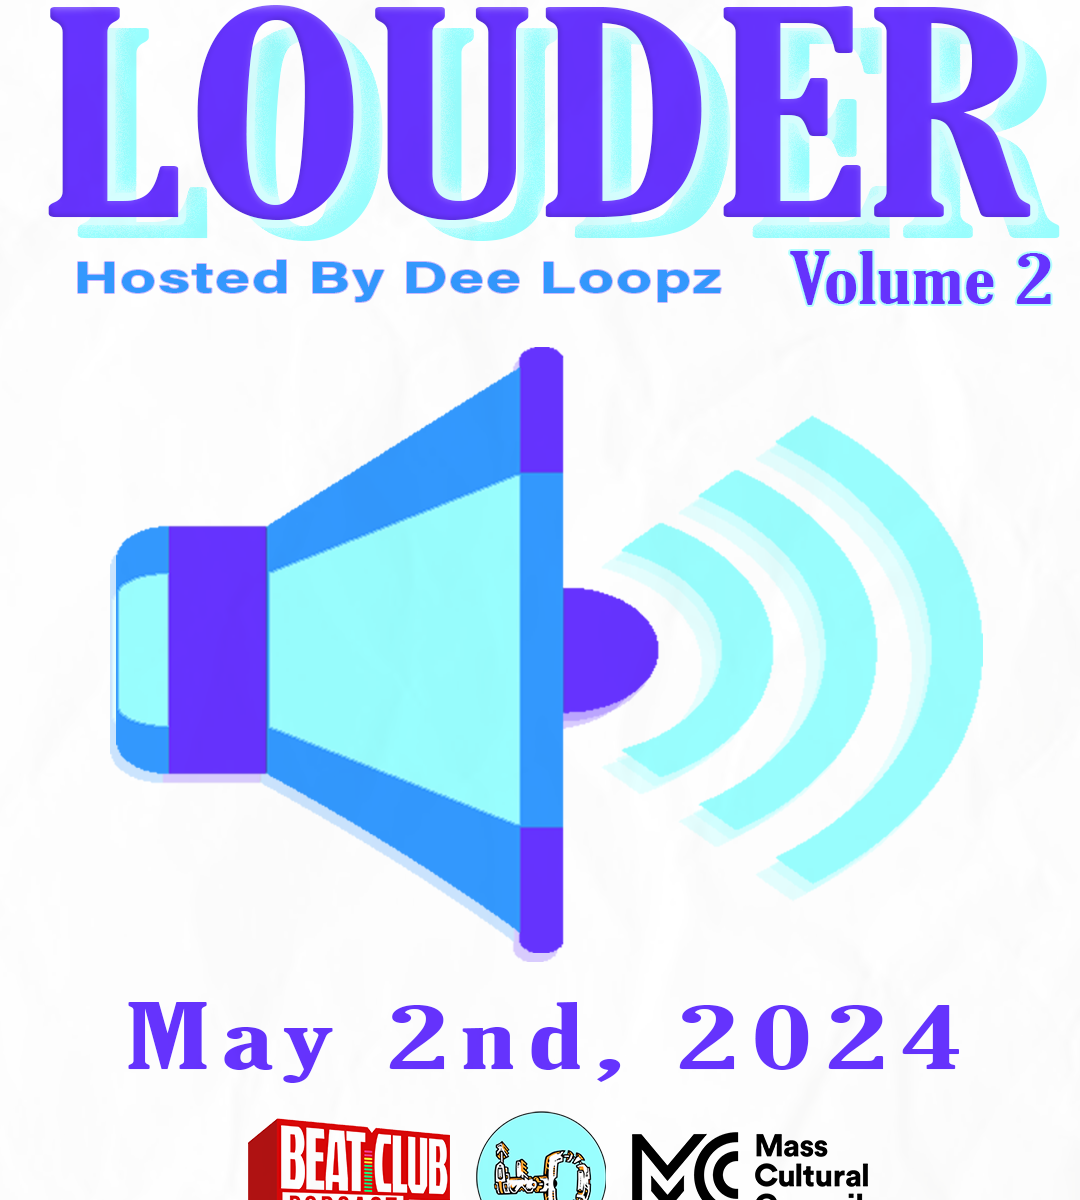 LFOD Life Presents LOUDER, Vol. 2. May 2, 2024 in Boston, MA. Featuring Latrell James, EvillDewer, Rain, and DJ TROY Frost.